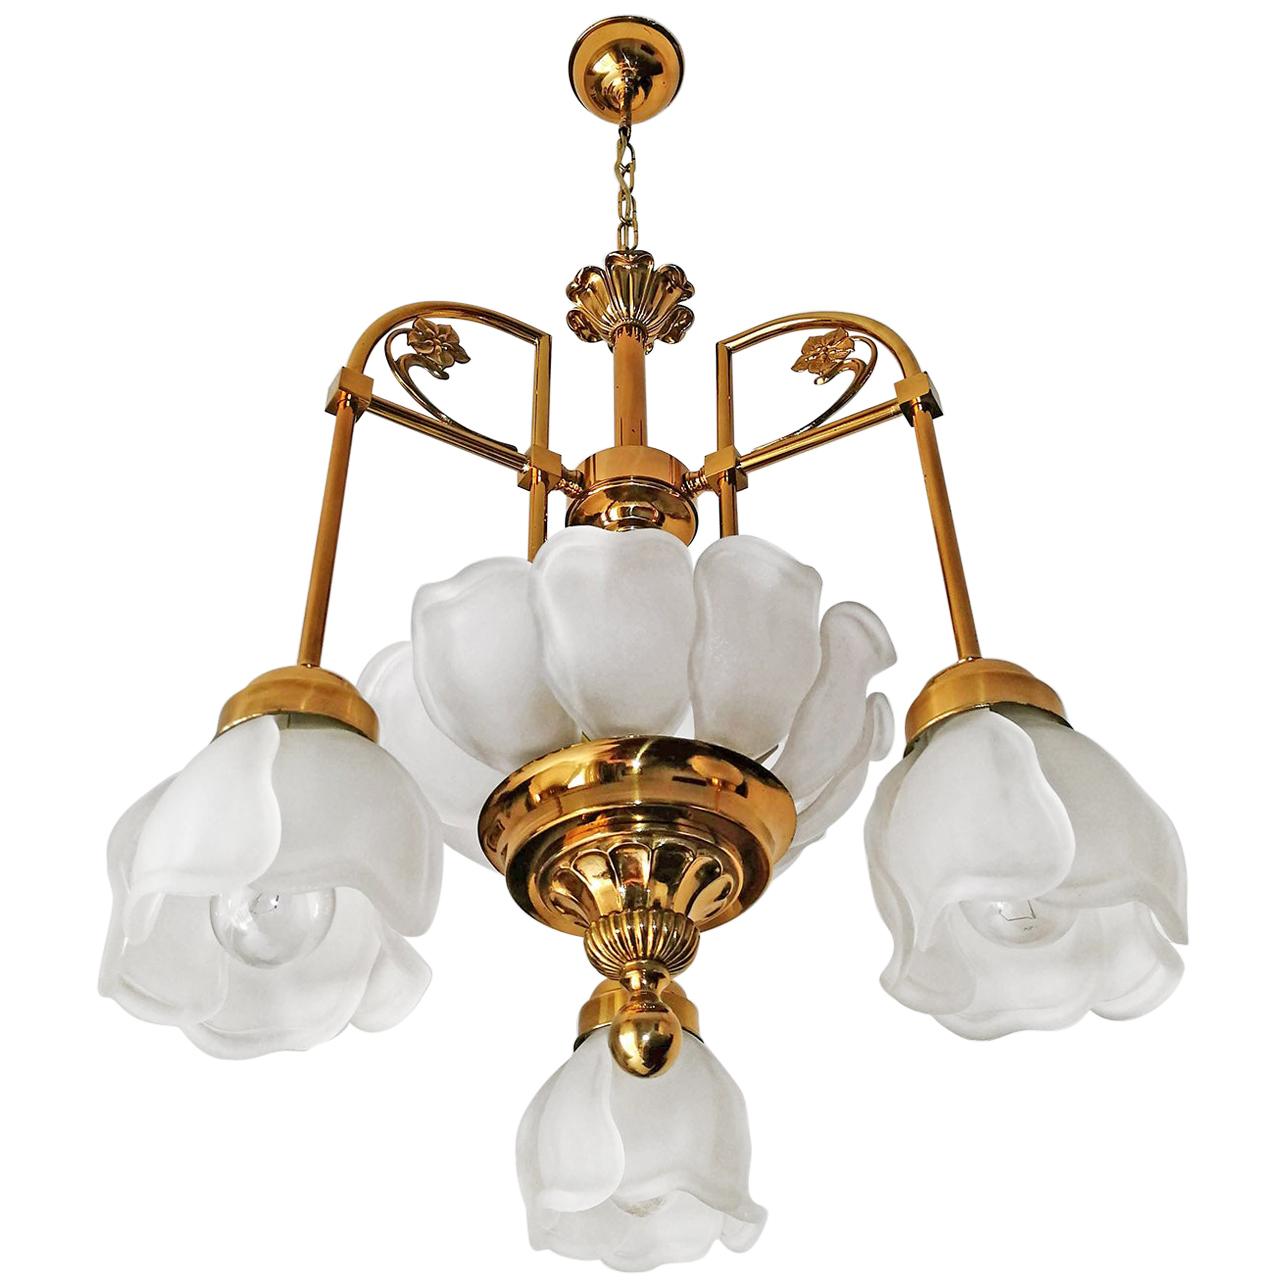 French Art Deco, Art Nouveau style art glass gilt brass chandelier, Tulip shades made of glass petals.
Measures:
Diameter; 17.7 in / 45 cm
Height 31.5 in (9.9 in/chain)/ 80 cm (25 cm/chain)
Weight 13 lb. (6 kg)
Six-light bulbs E14 / good working